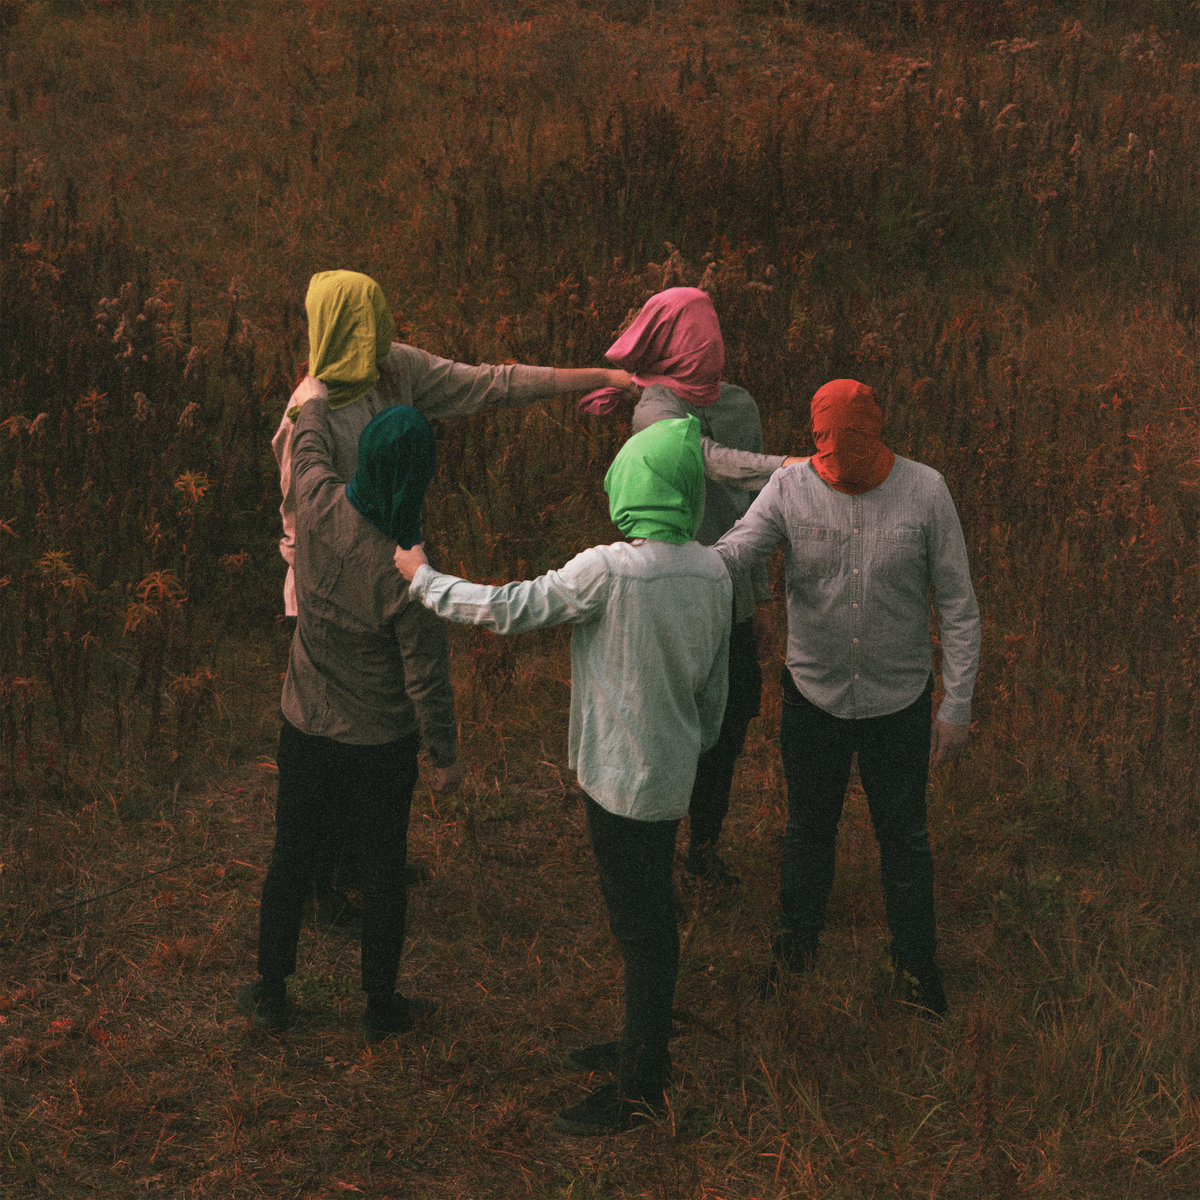 Album art for Celebrity Therapist by The Callous Daoboys. 5 people standing in a circle in a field, each holding the shoulder of the person in front of them. They're each wearing a bag of fabric over their head, one is red, one is lime green, one is dark green, one is yellow, and one is pink.